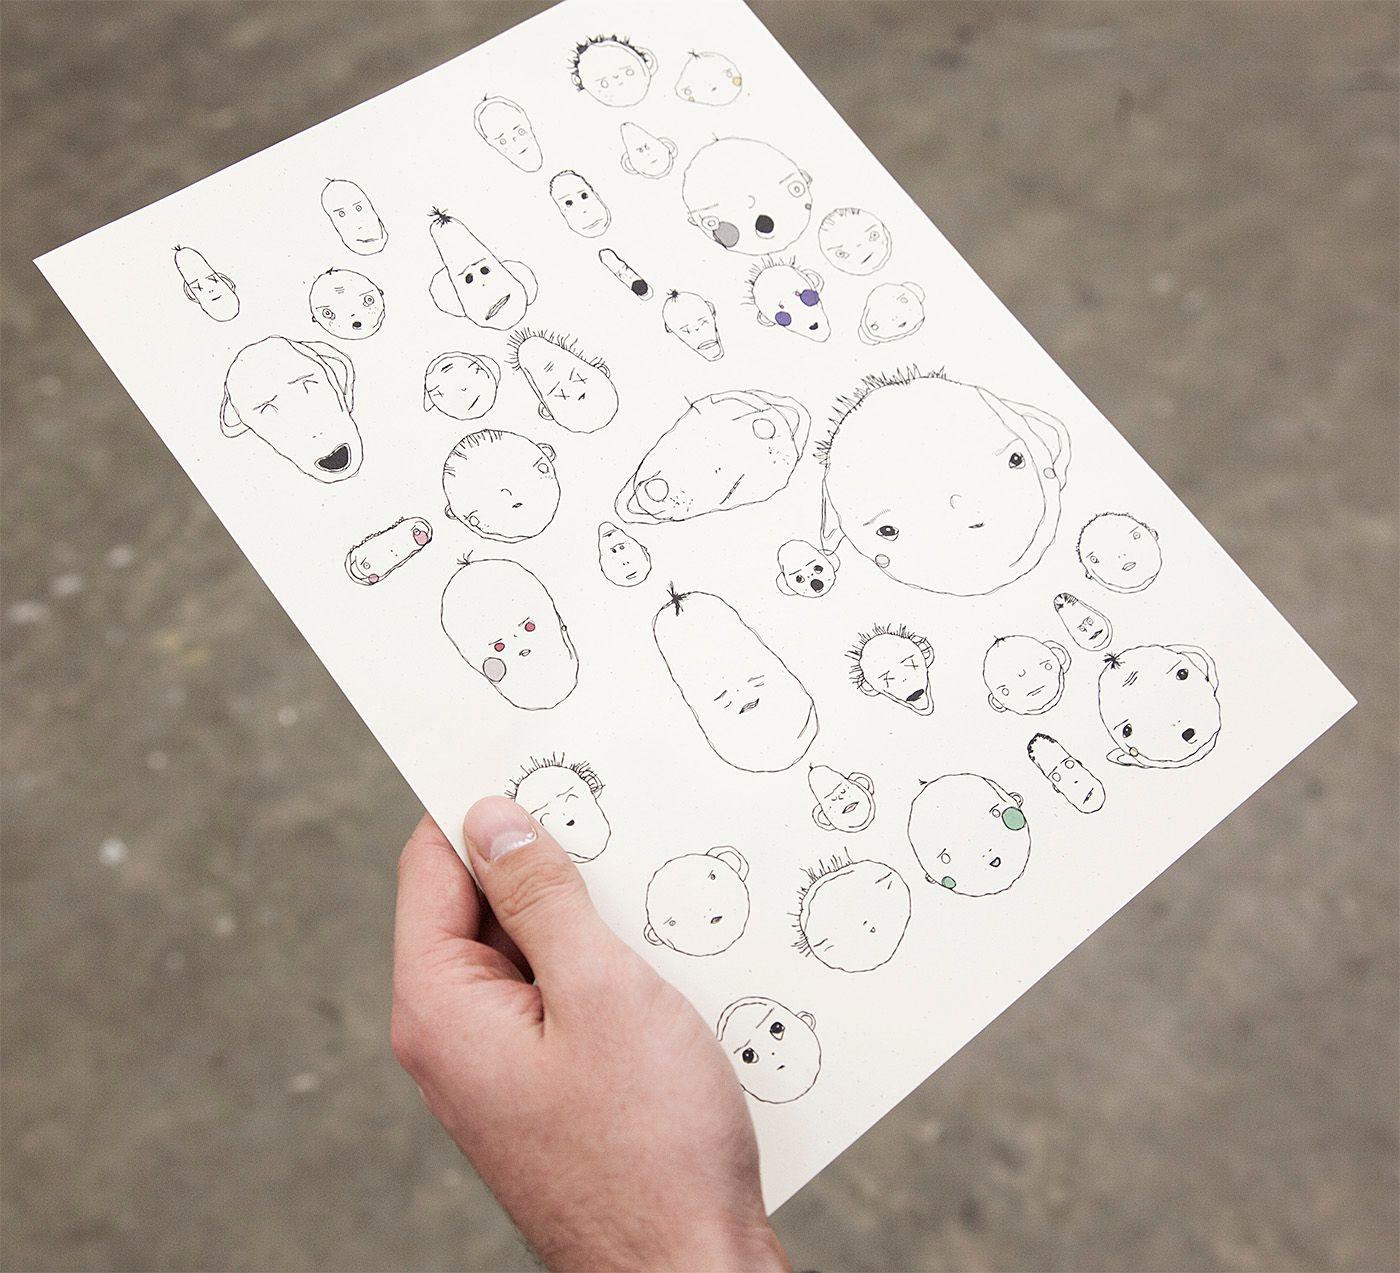 There are a variety of weird faces on a printed sheet of paper/ Some are large baby-like faces, while others are small. All are outlined in black and very few have any color. They seem to be mostly circular or oblong shape faces. Some have blush, freckles